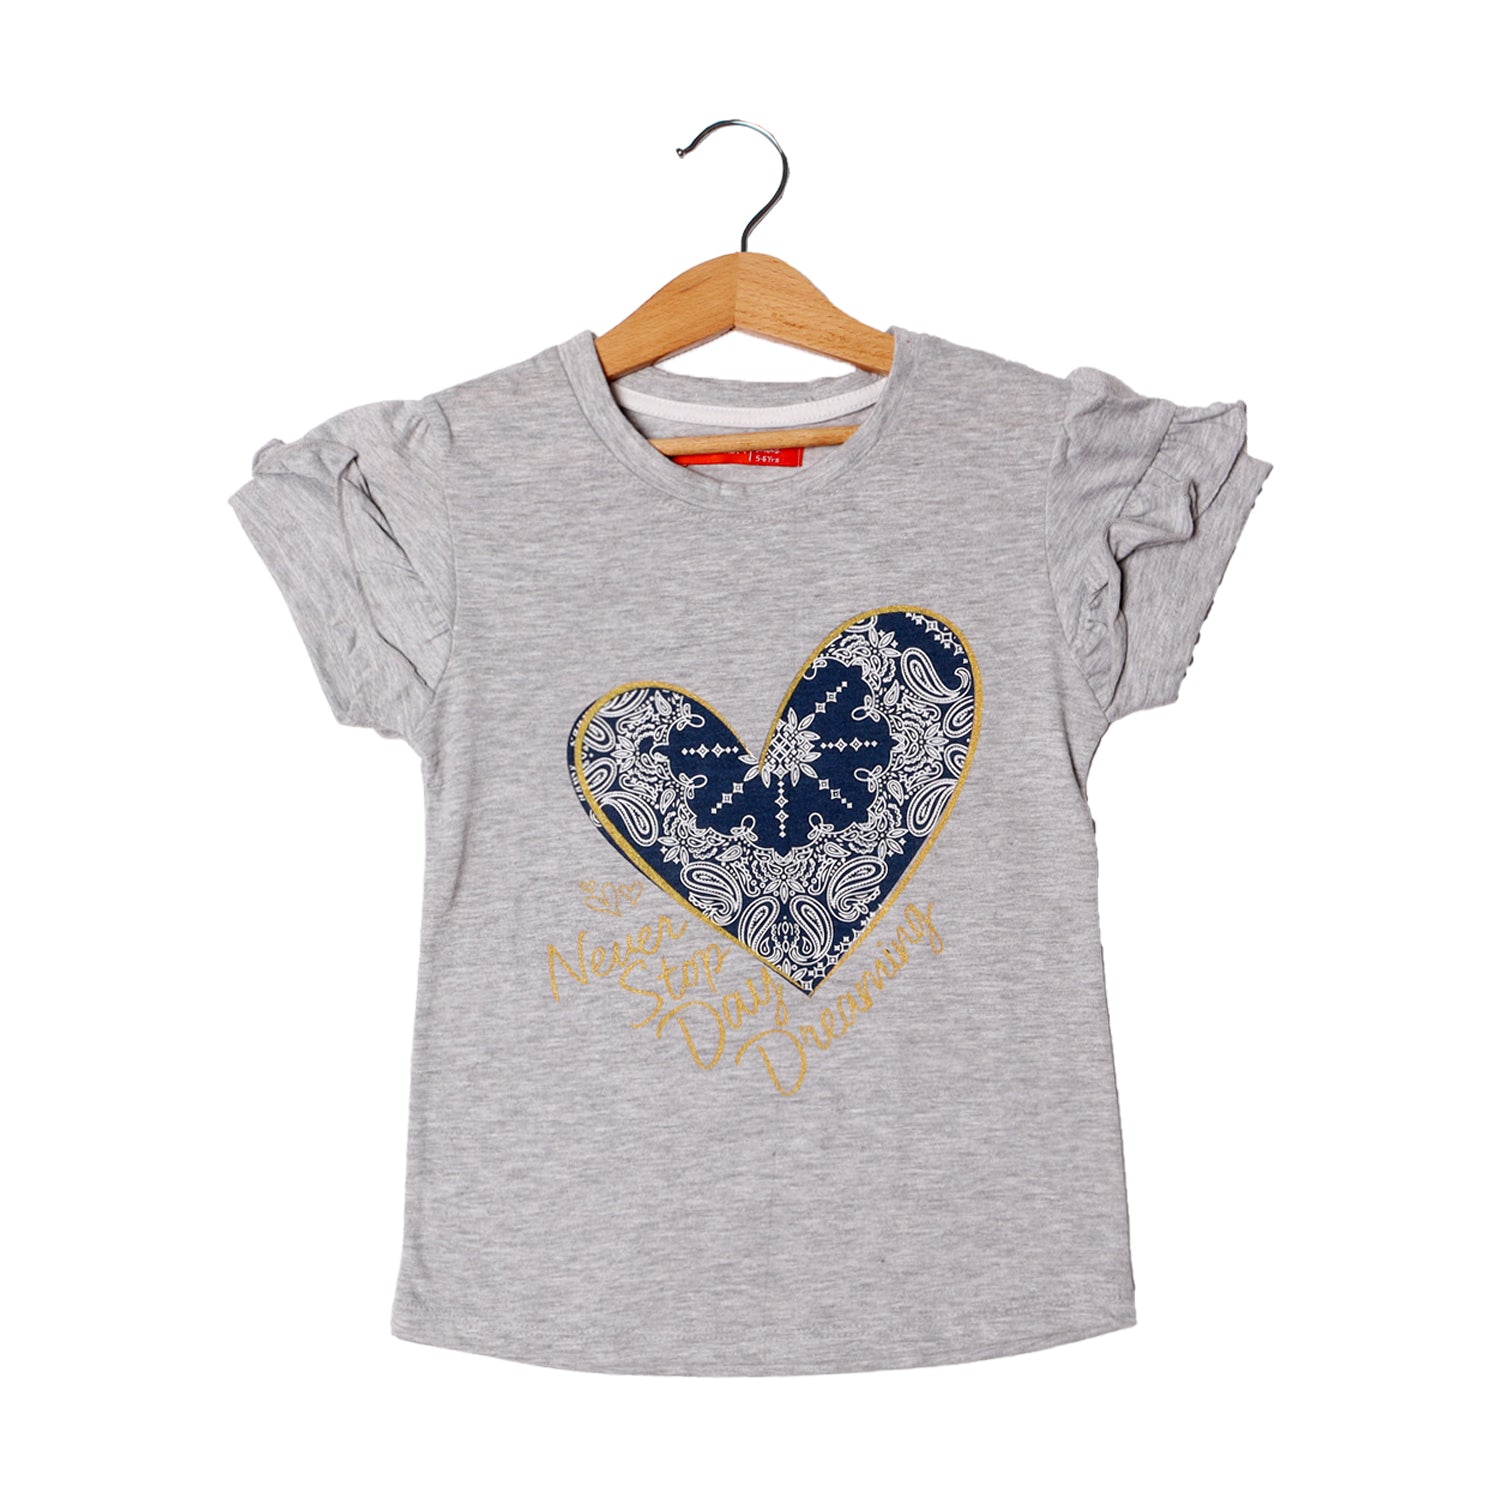 GREY NEVER STOP DAY DREAMING PRINTED T-SHIRT FOR GIRLS